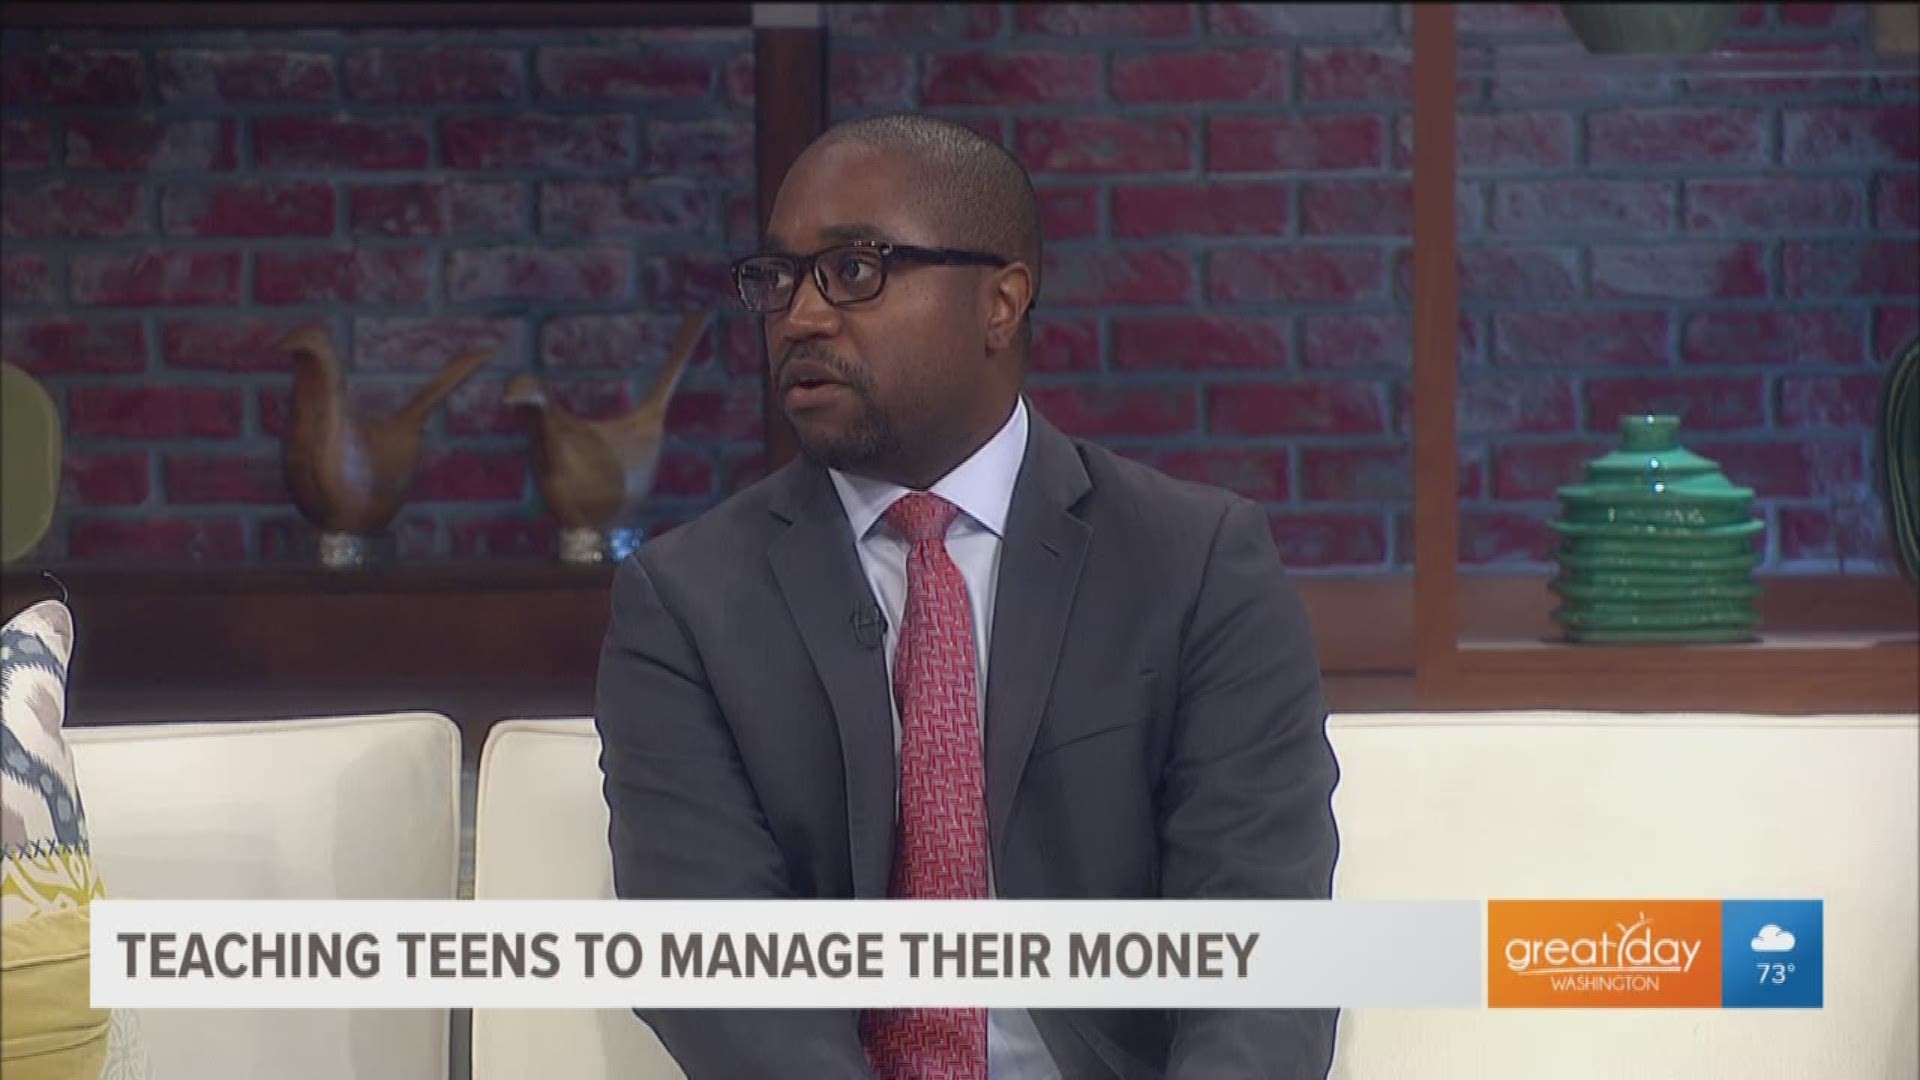 Roy Paul, executive director of Cents Ability shares the top tips for parents to teach their teens how to manage their money.